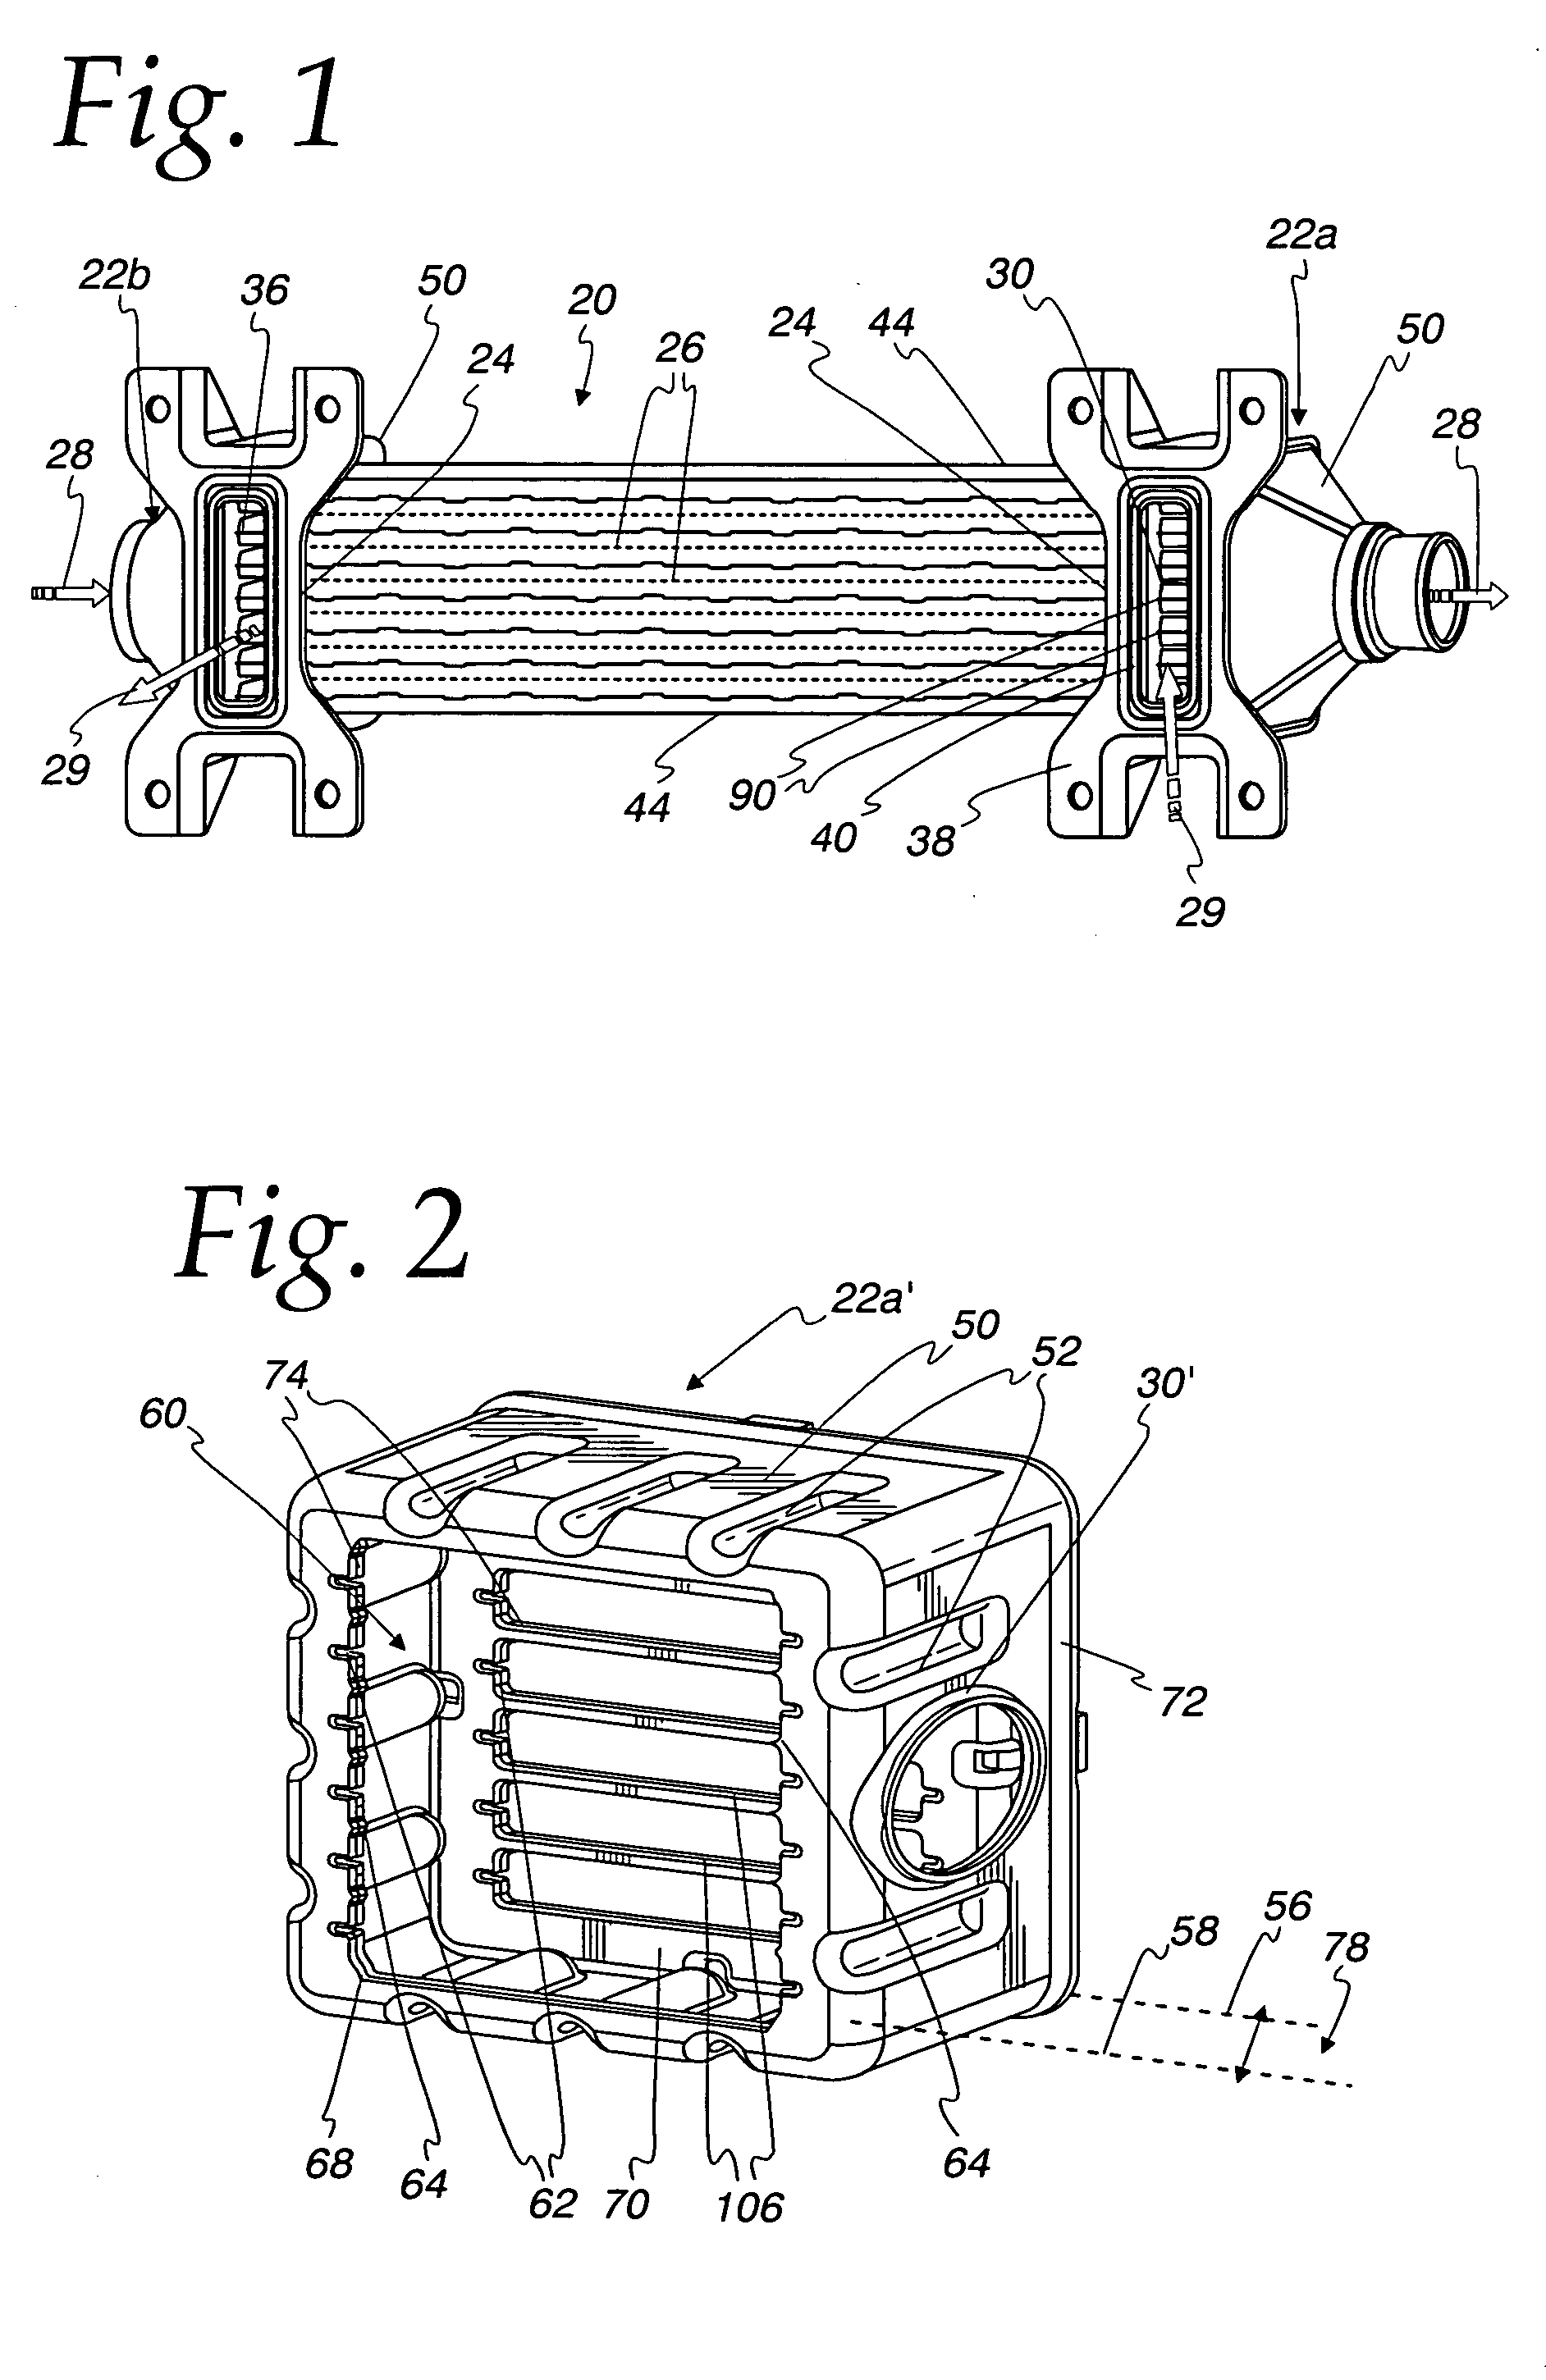 Heat exchanger with flat tubes